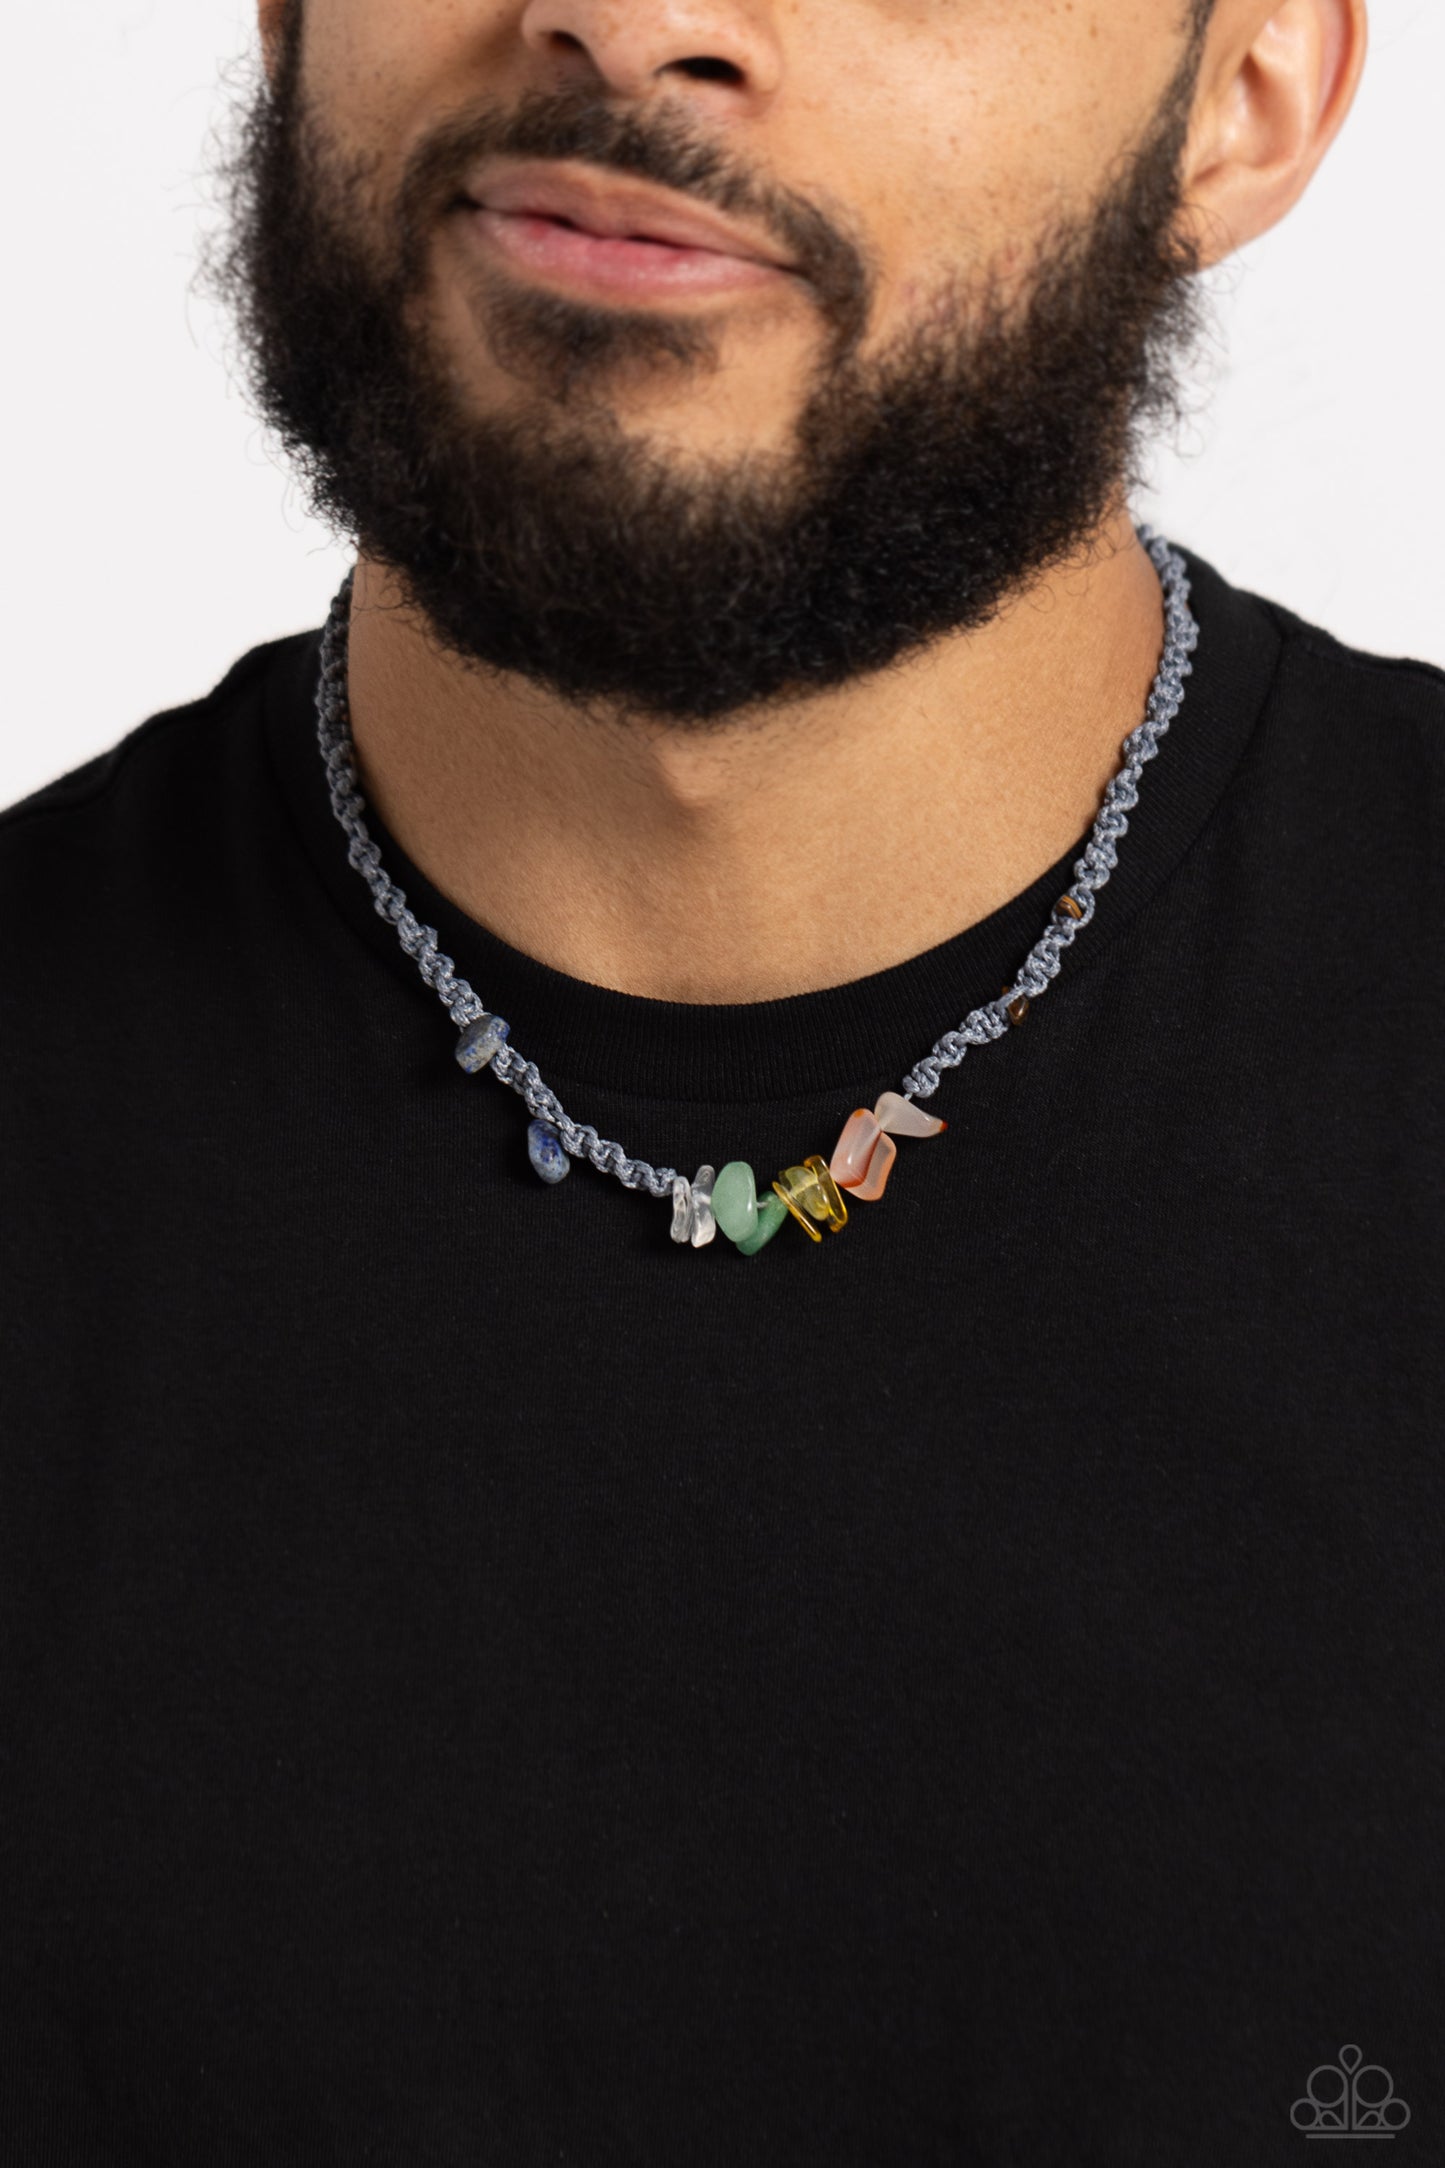 Paparazzi Accessories Chiseled Craving - Silver Braided gray cording knots around a chiseled, multicolored collection of stones, including amethyst, jade, lapis, Tiger's eye, and others, for an urban explosion of color below the collar. Features a button